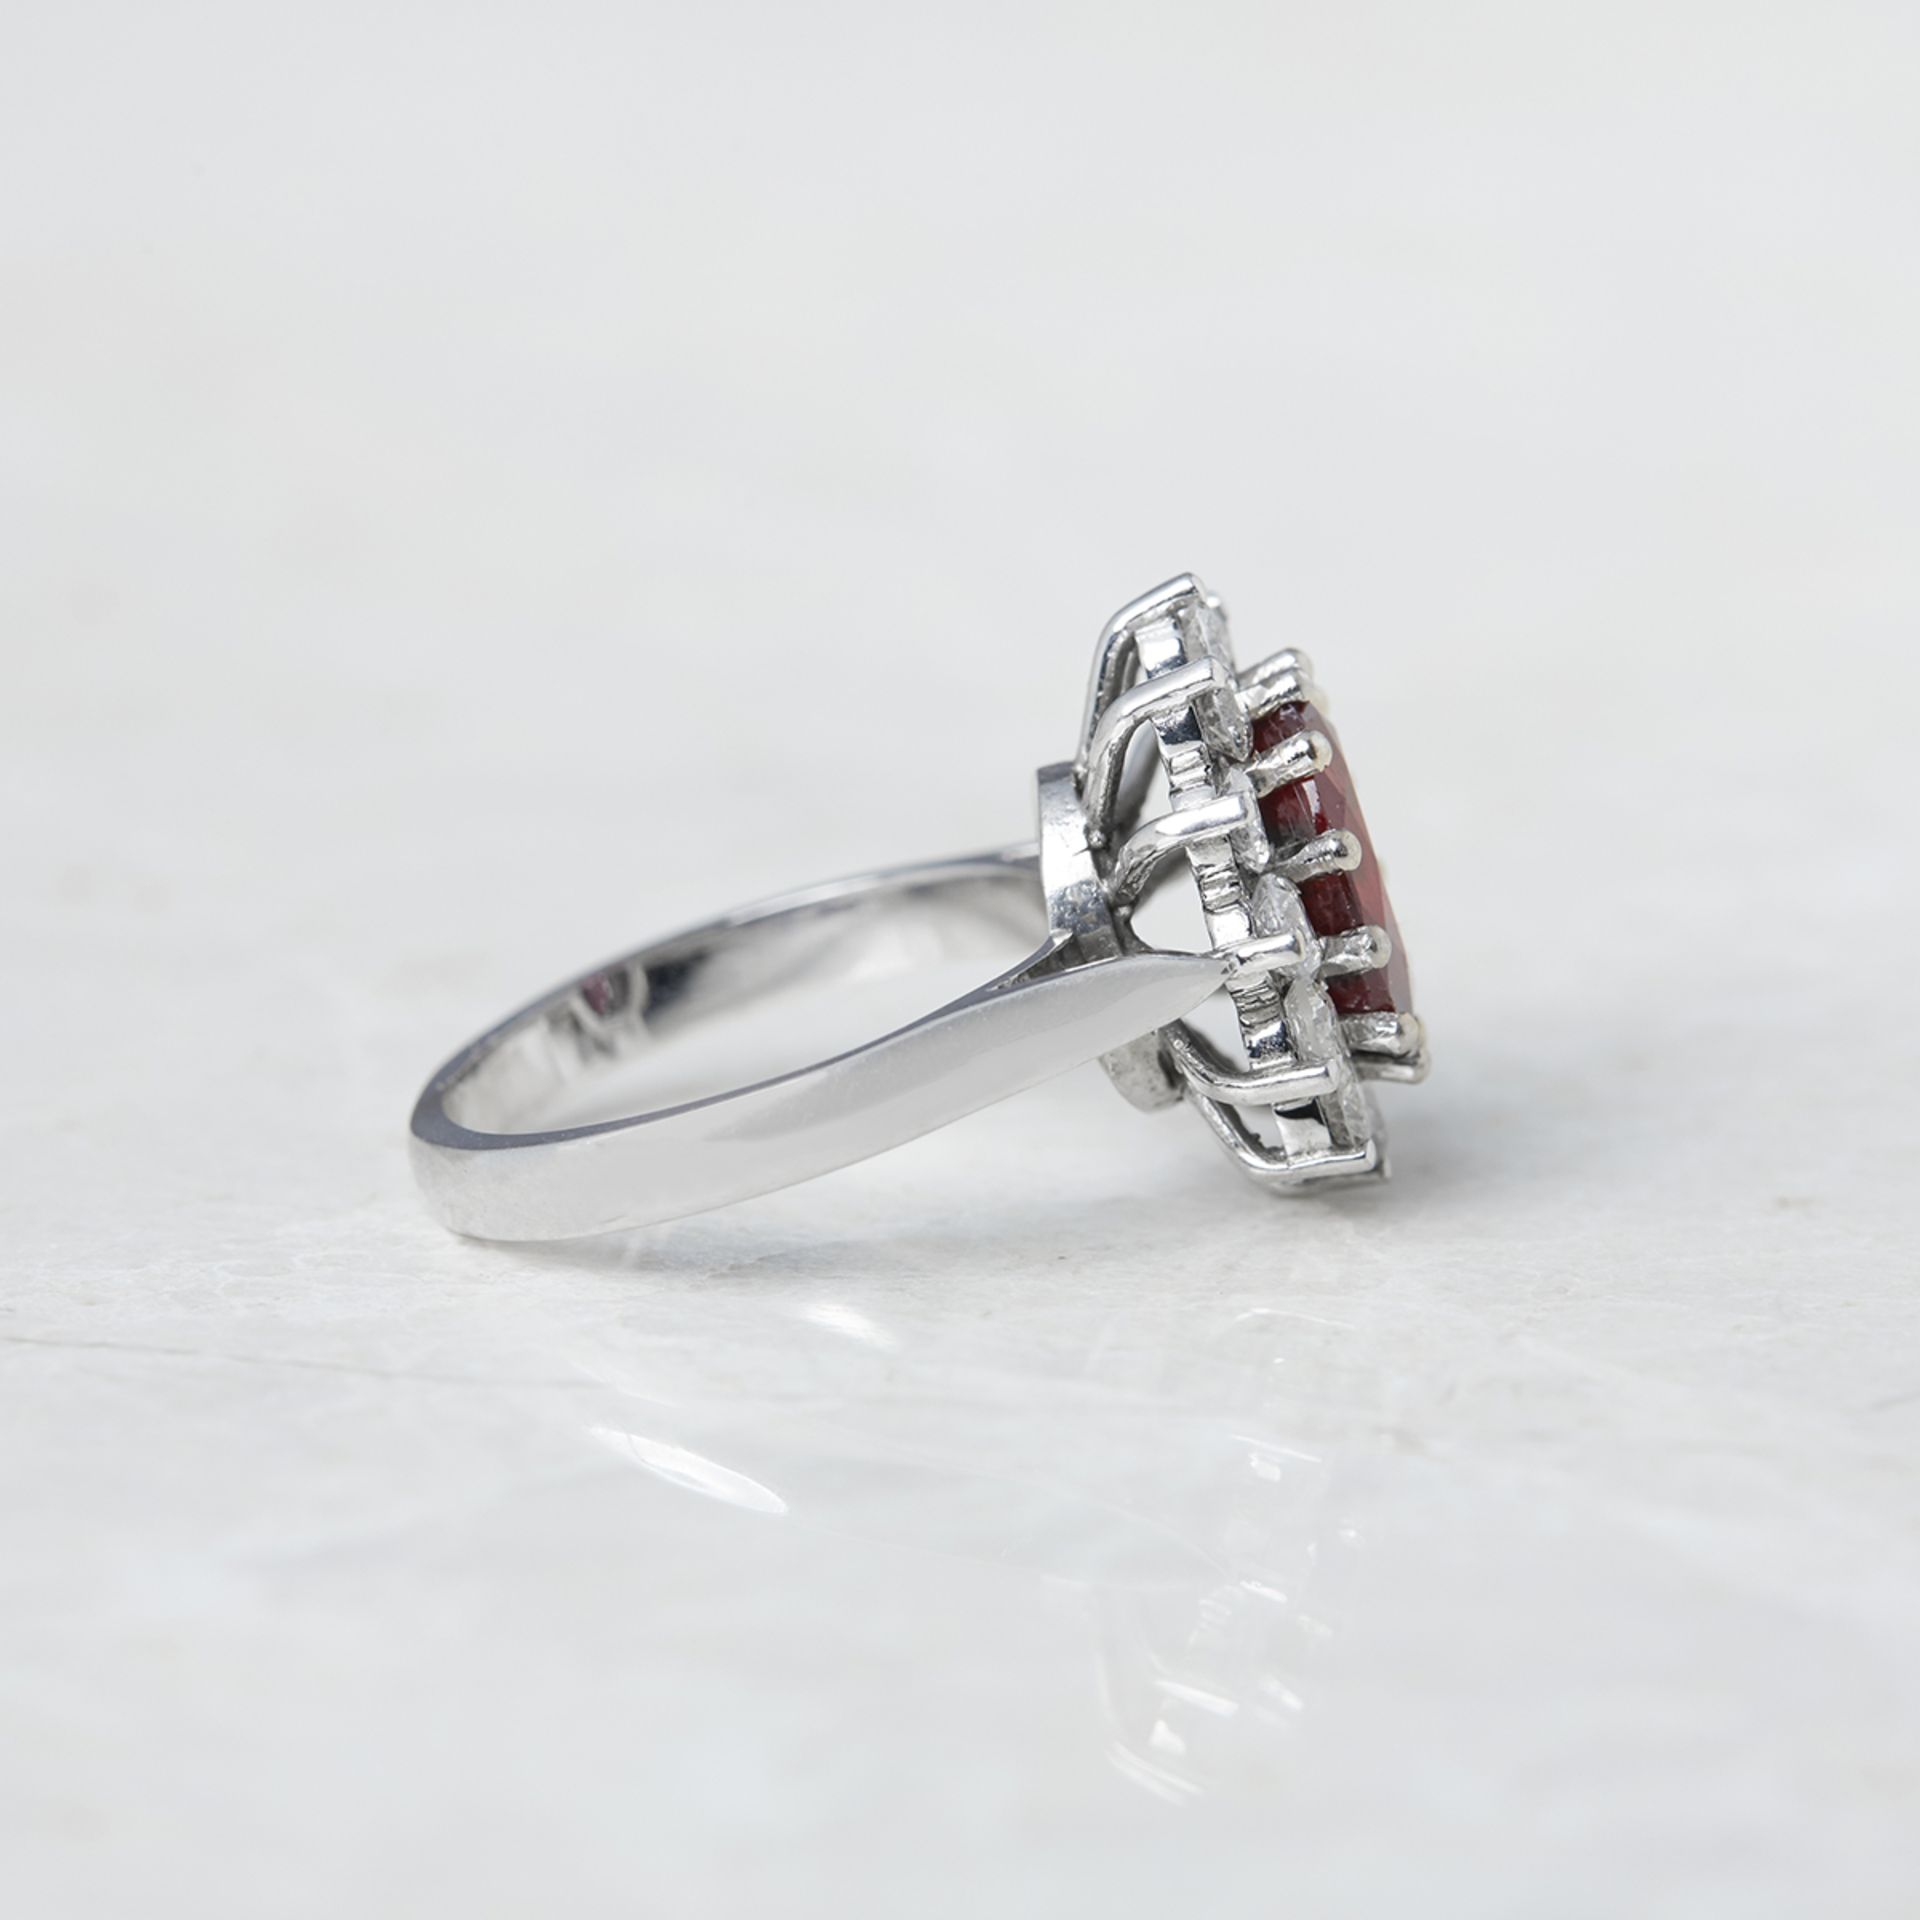 Unbranded, 18k White Gold 2.50ct Ruby & 1.00ct Diamond Cocktail Ring - Image 2 of 5